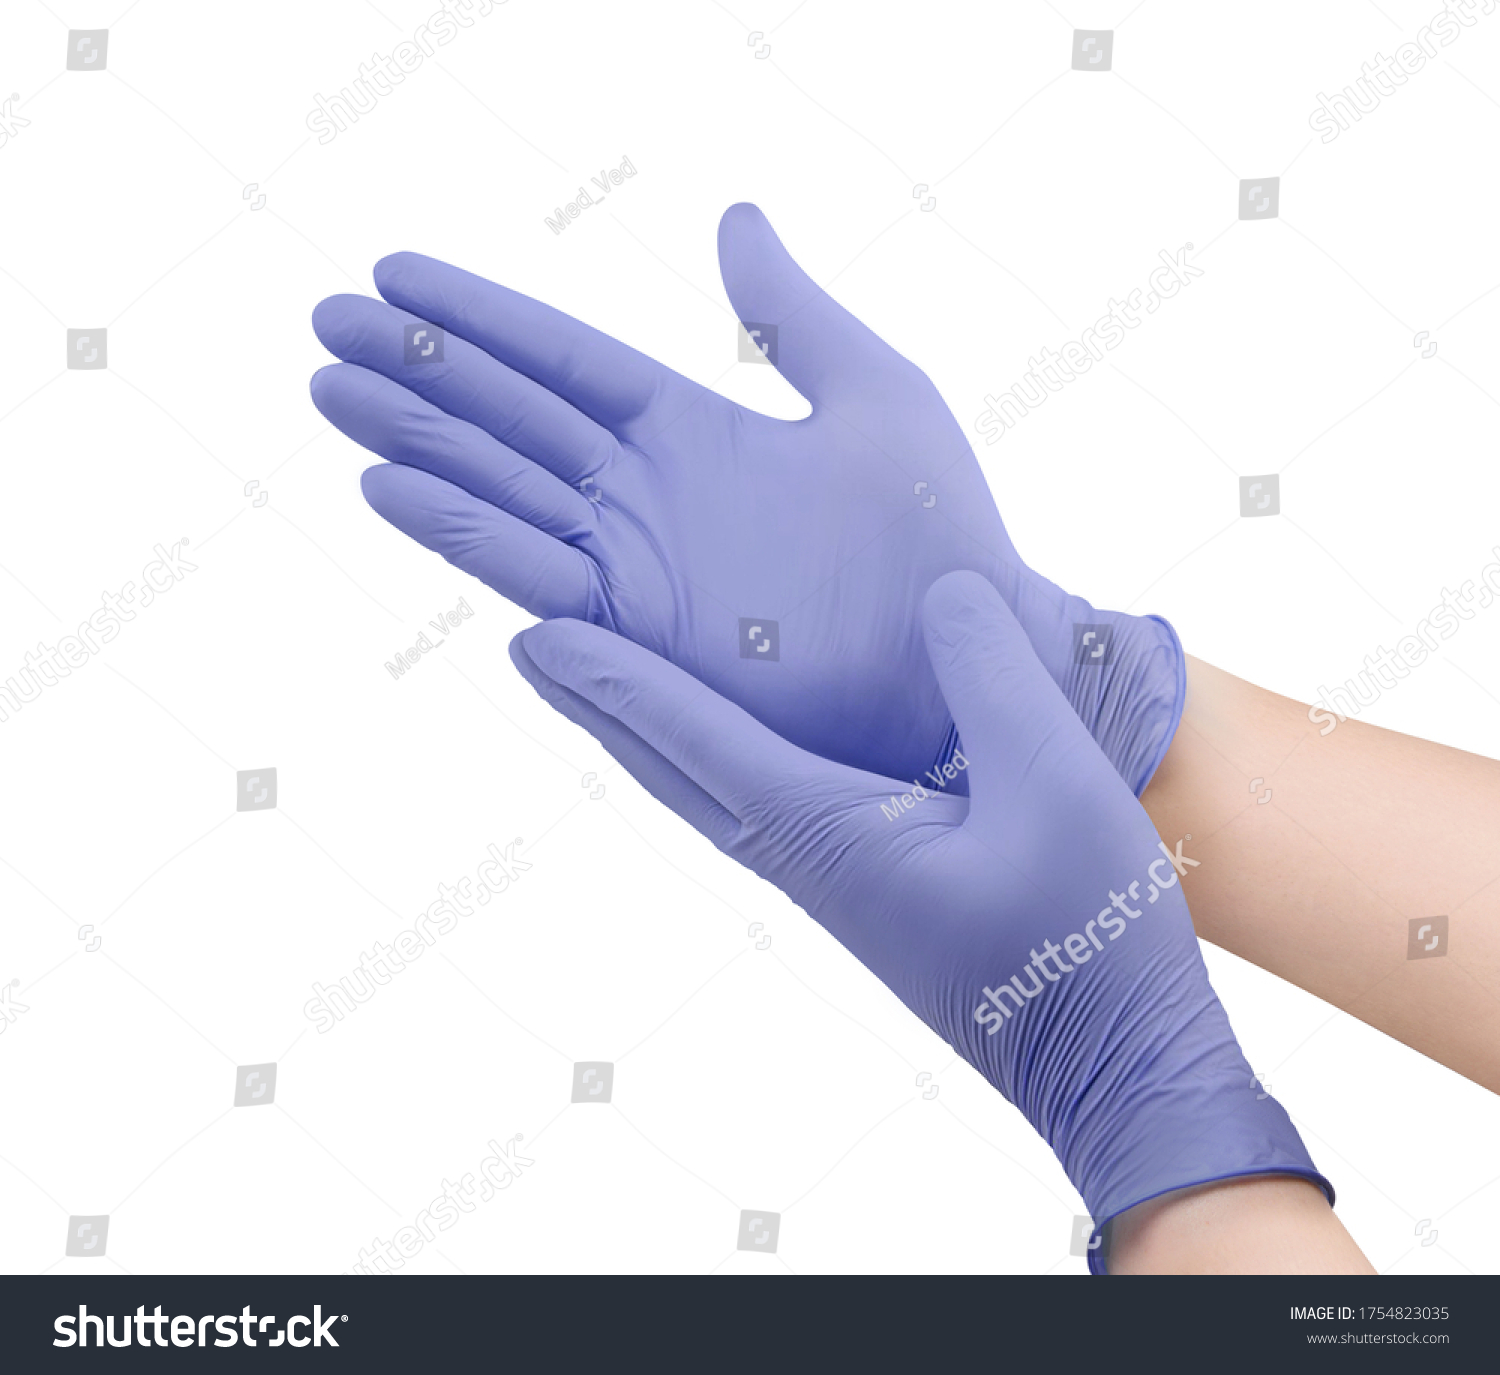 Two purple surgical medical gloves isolated on white background with hands. Rubber glove manufacturing, human hand is wearing a latex glove. Doctor or nurse putting on nitrile protective gloves #1754823035